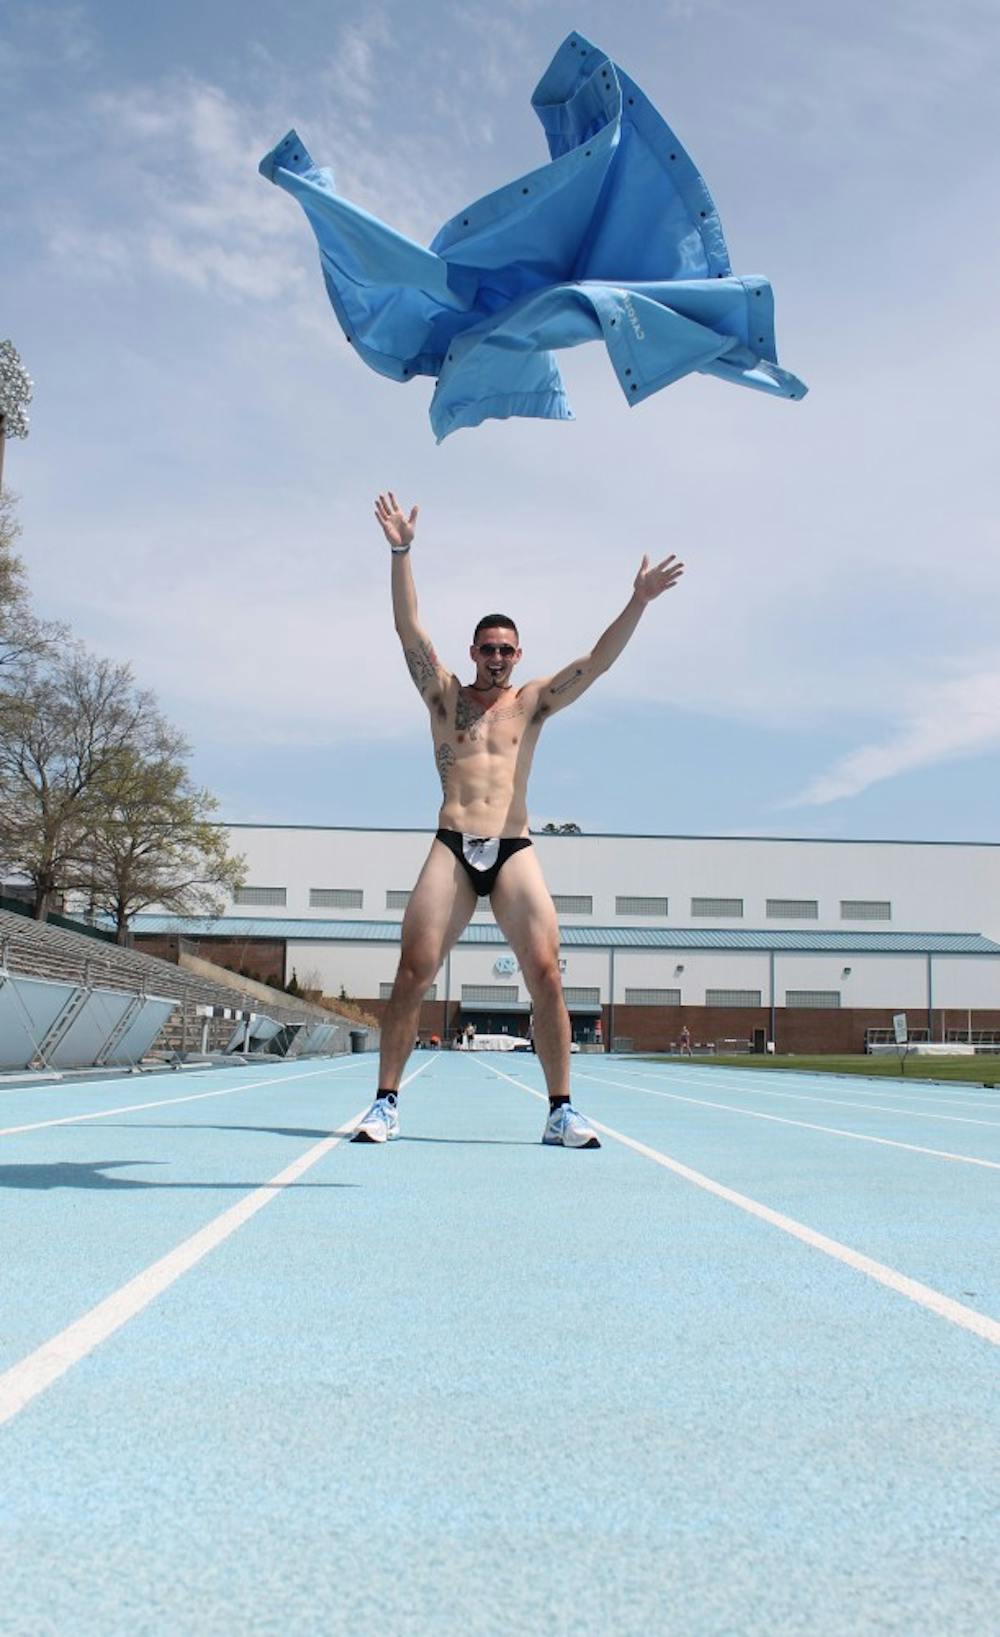 <p>Dylan Moore stripped in a Biology 101 in a video that went viral. A former track athlete, he was asked to leave the team and faces Honor Court charges for the stunt.</p>